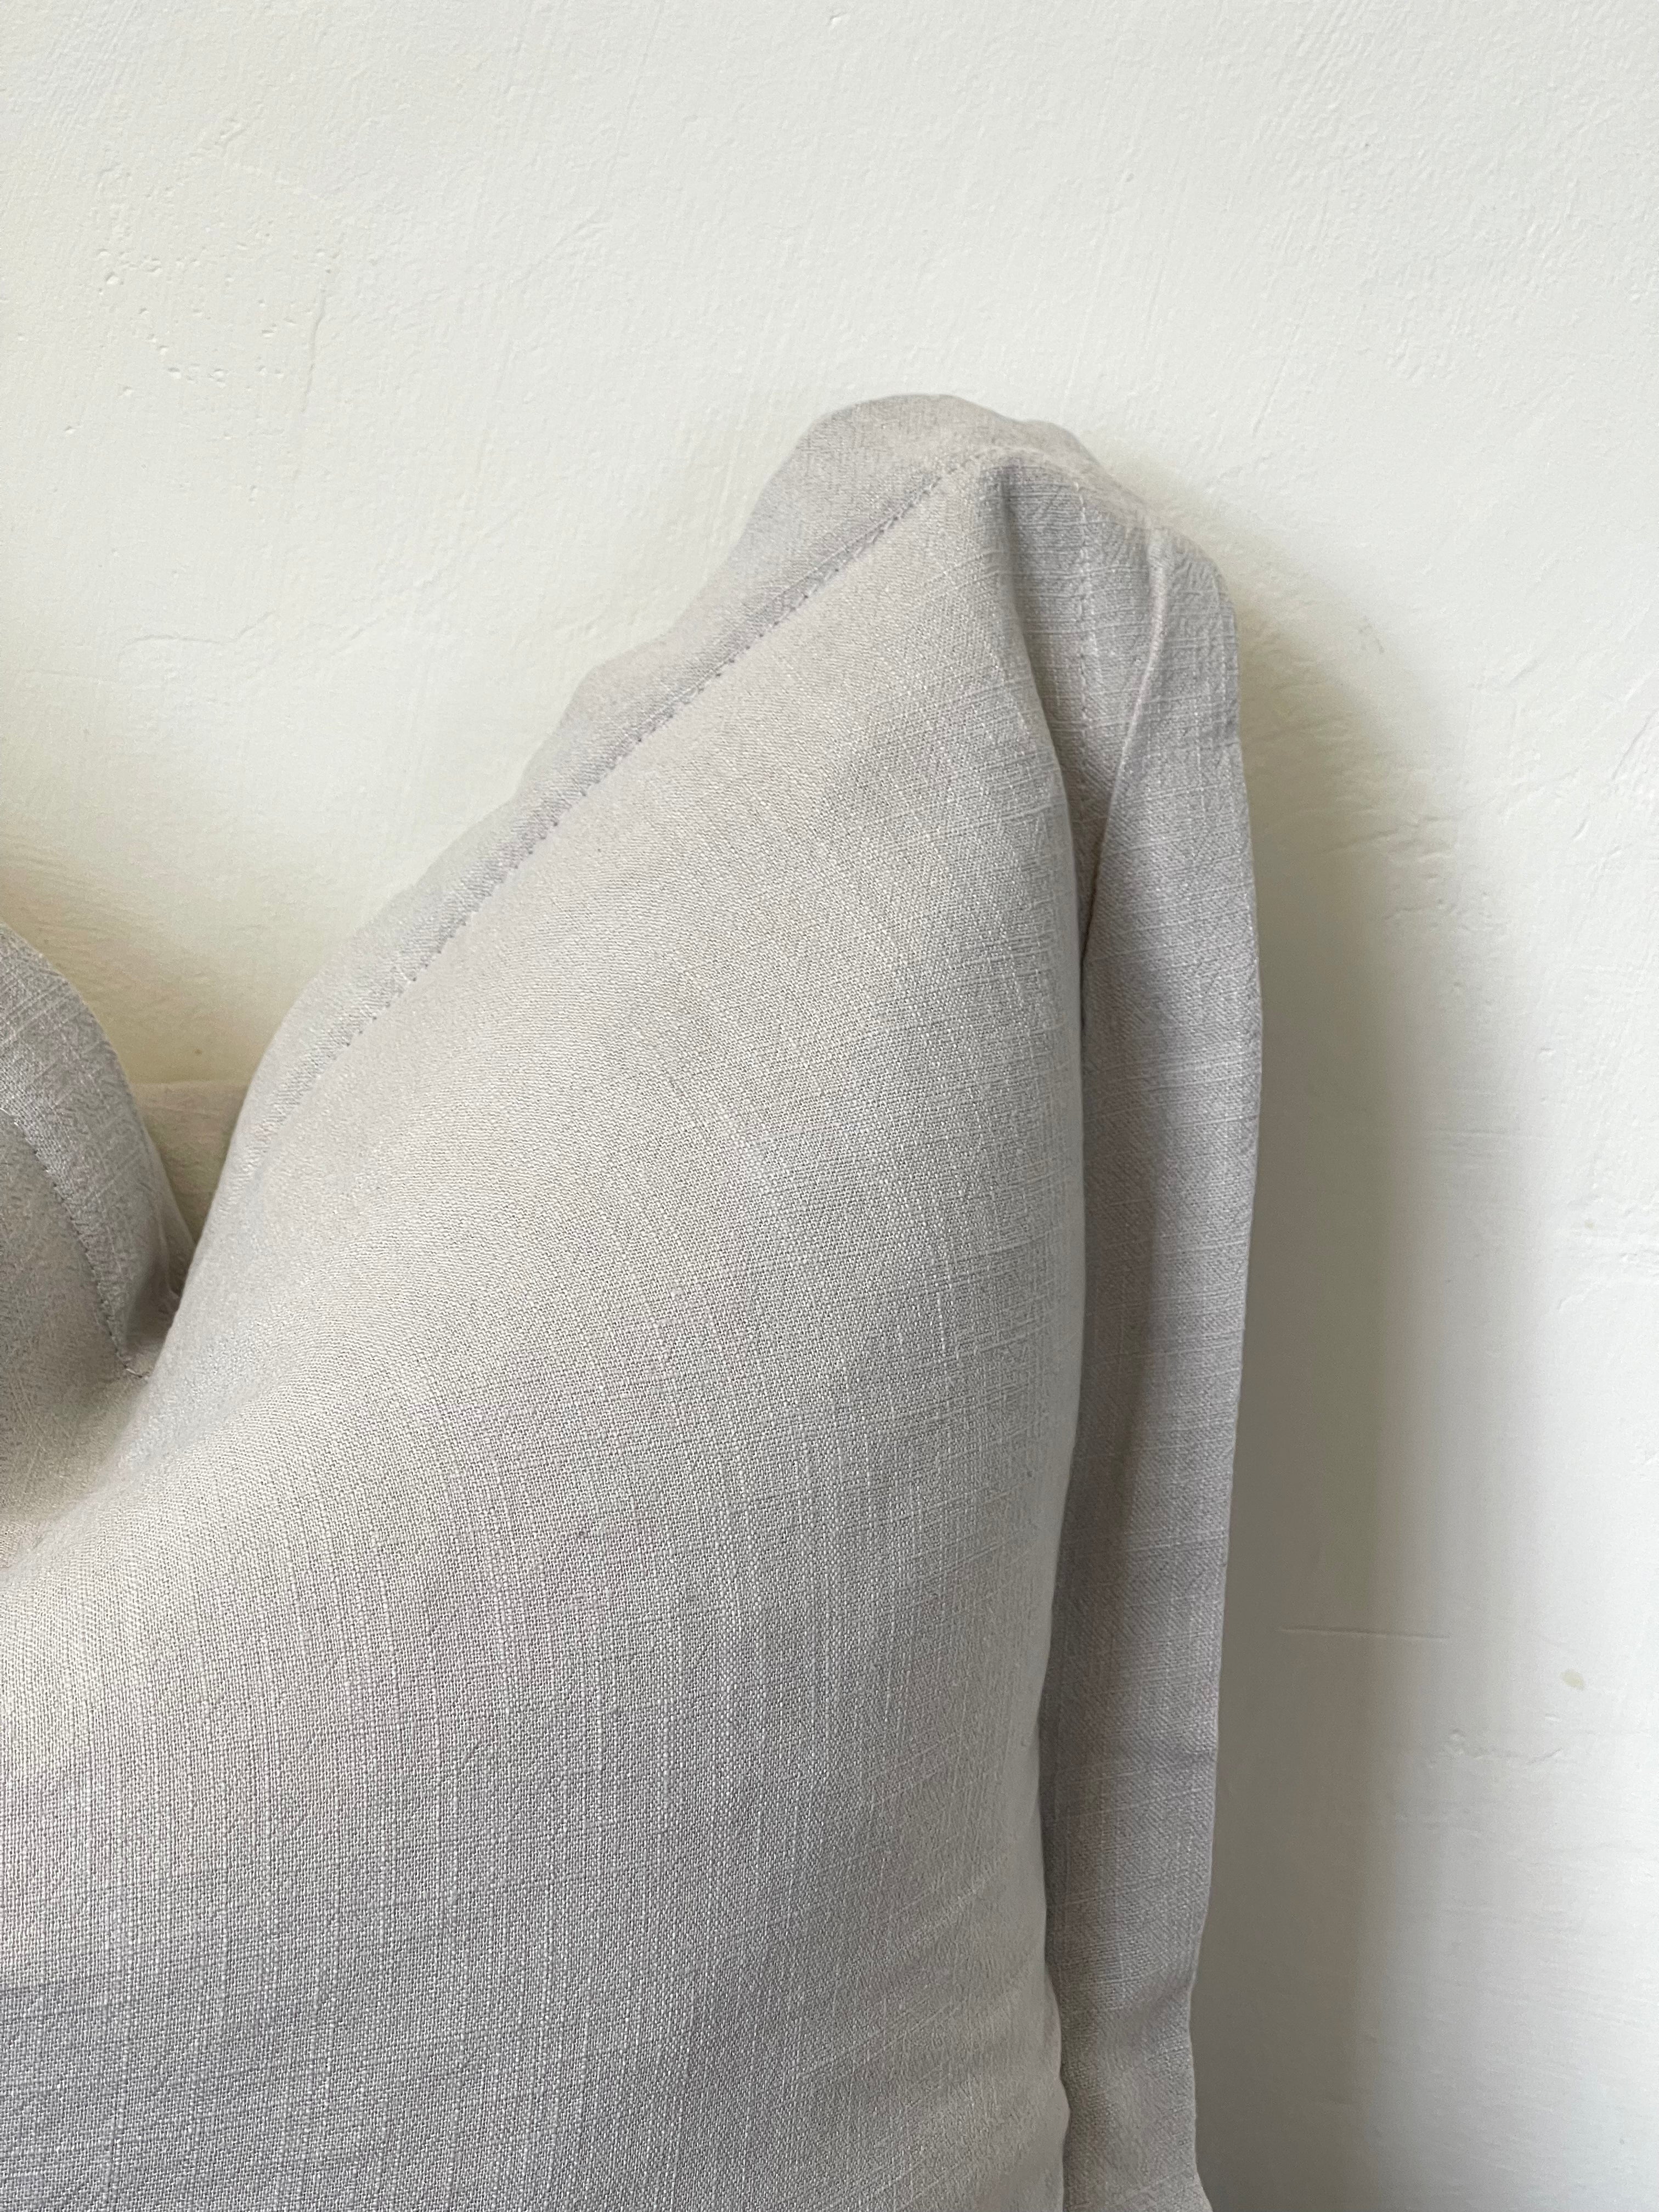 Luxury linen blend cushion in light grey, ideal for complementing a neutral aesthetic in home decor.